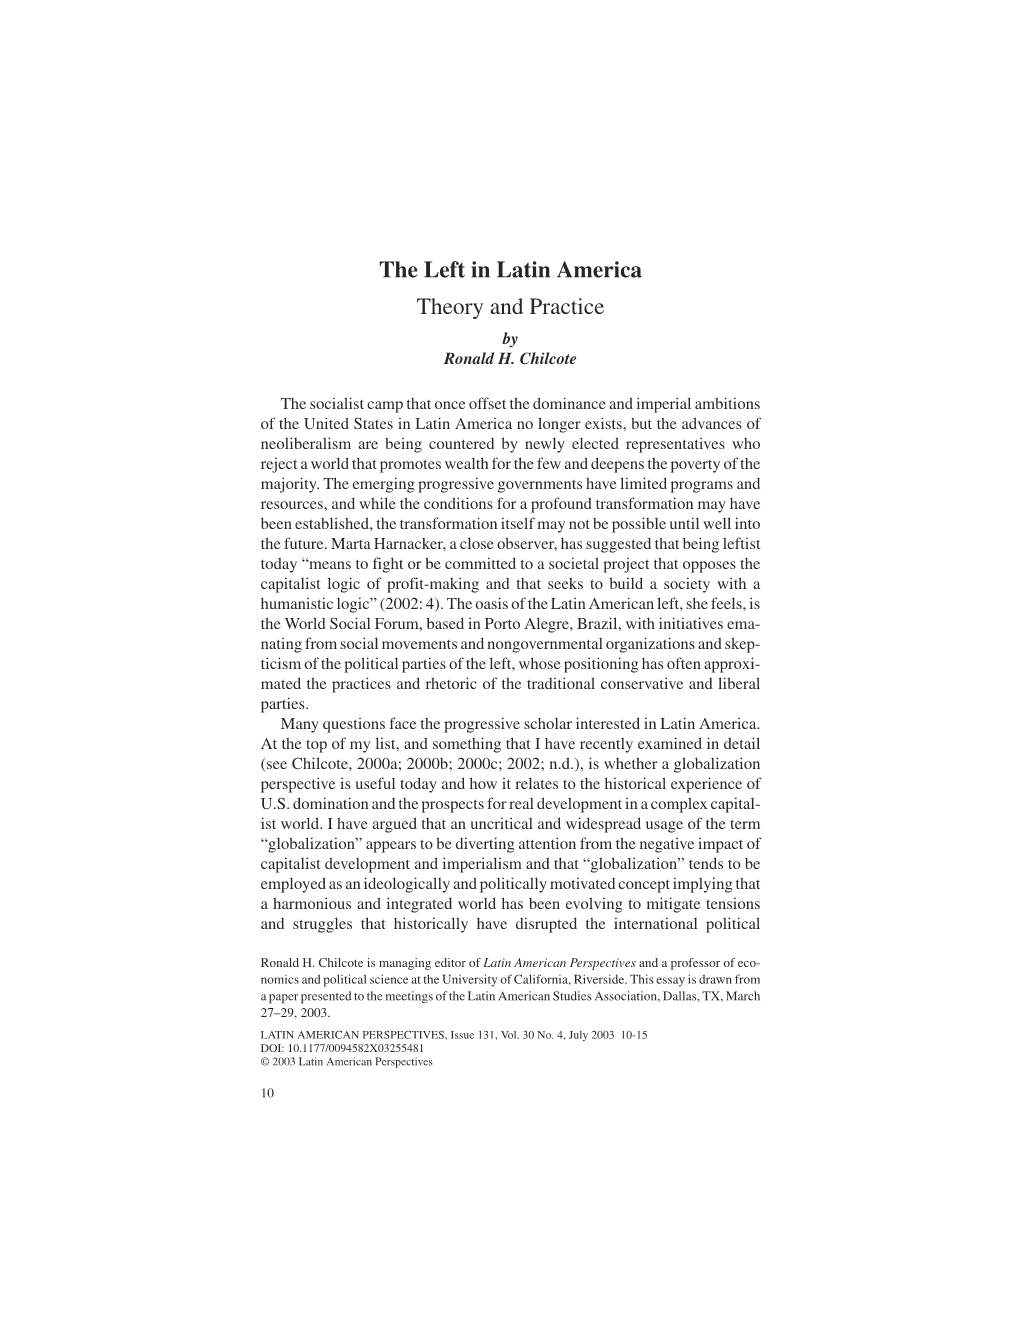 The Left in Latin America Theory and Practice by Ronald H